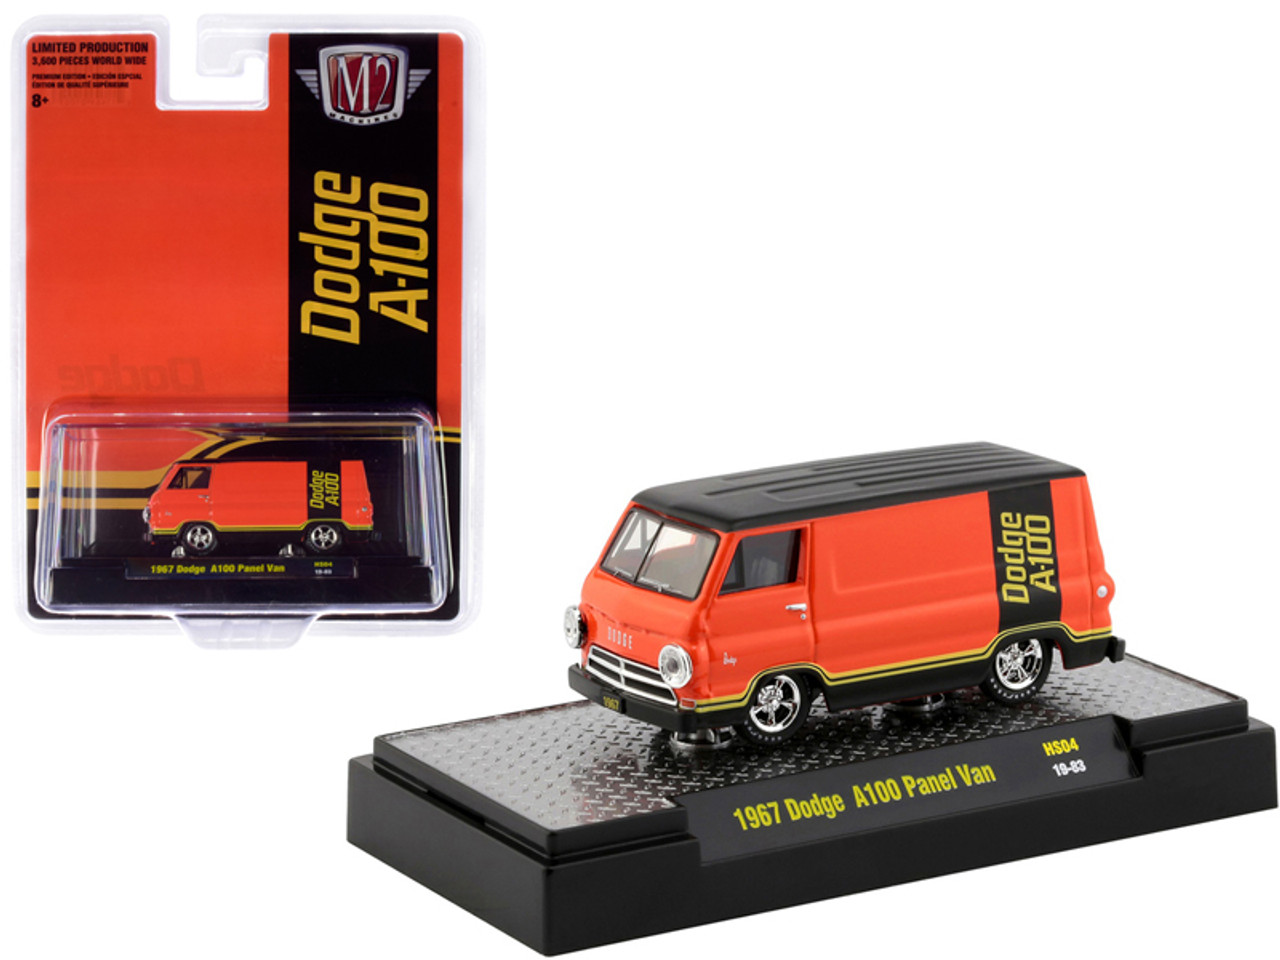 1967 Dodge A100 Panel Van Orange and Black "Hobby Exclusive" Limited Edition to 3600 pieces Worldwide 1/64 Diecast Model Car by M2 Machines